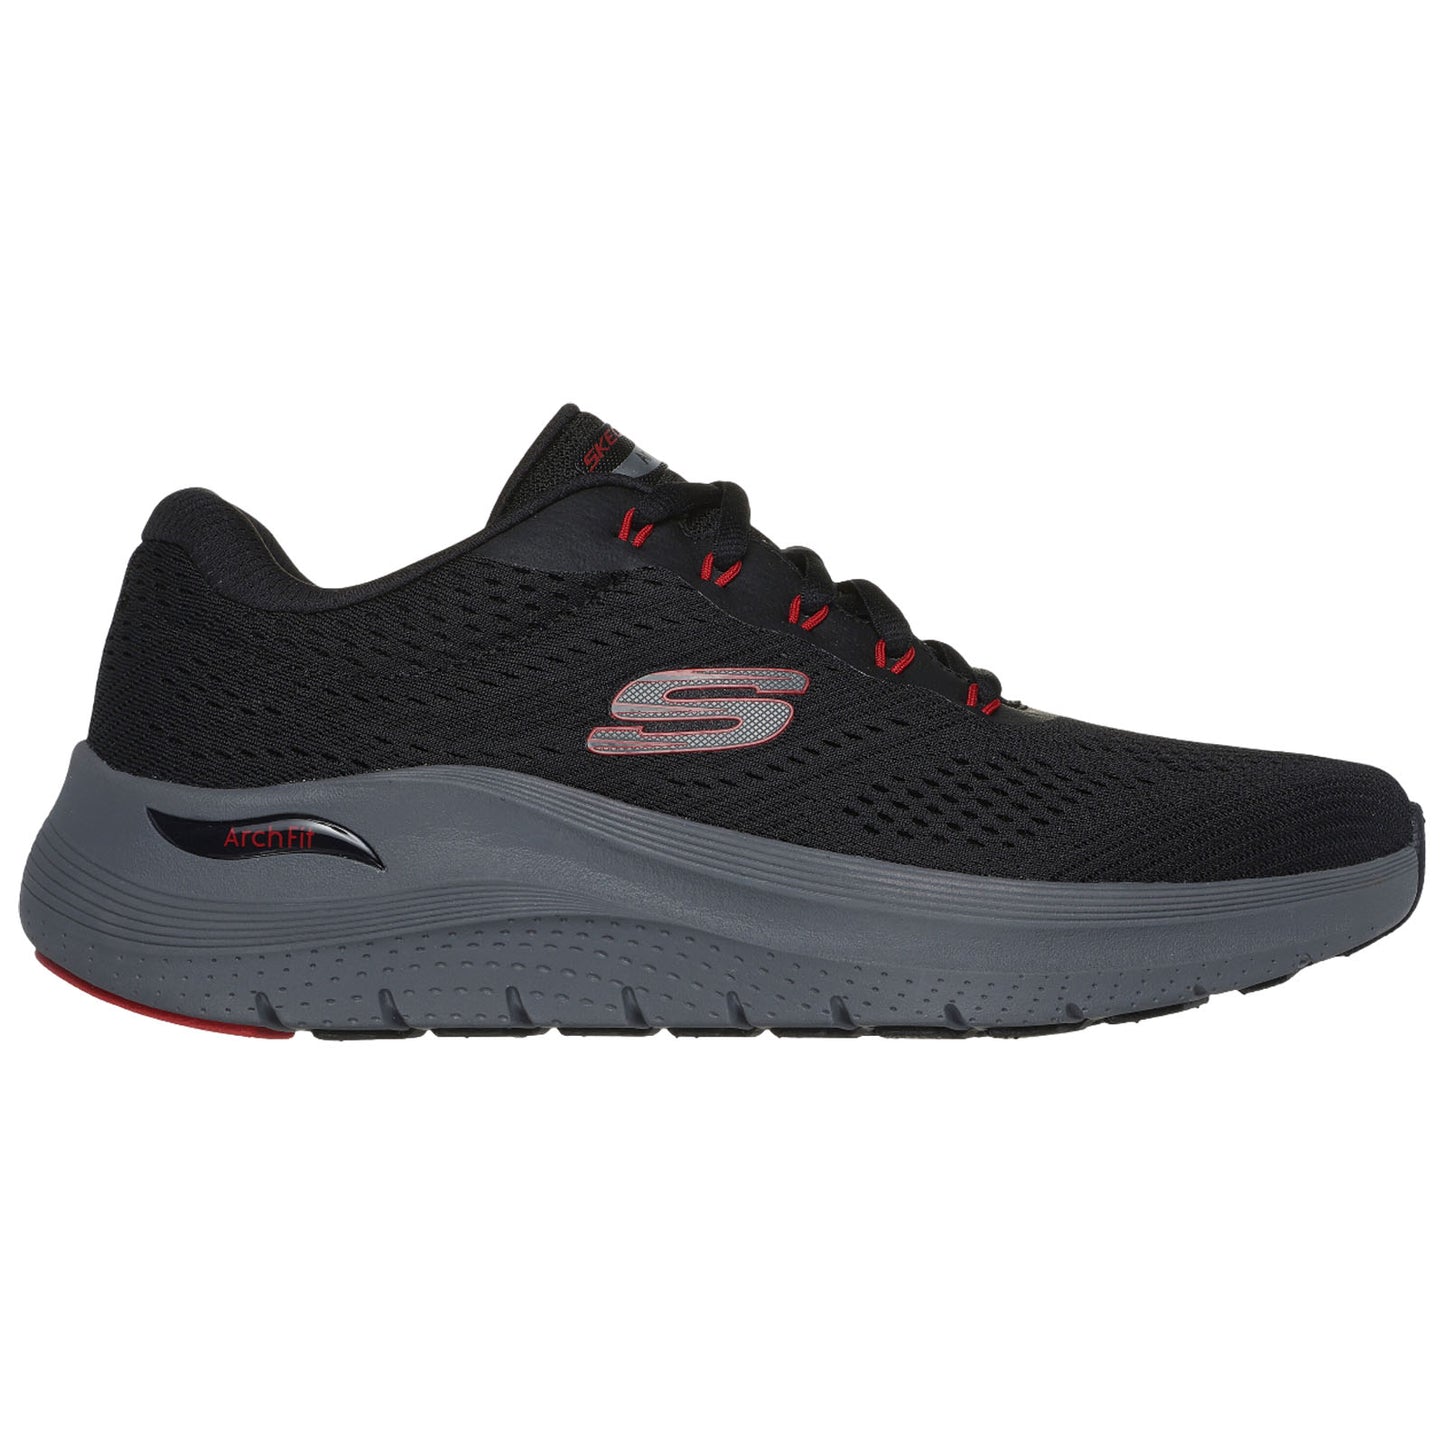 Skechers Mens Arch Fit 2.0 Trainers